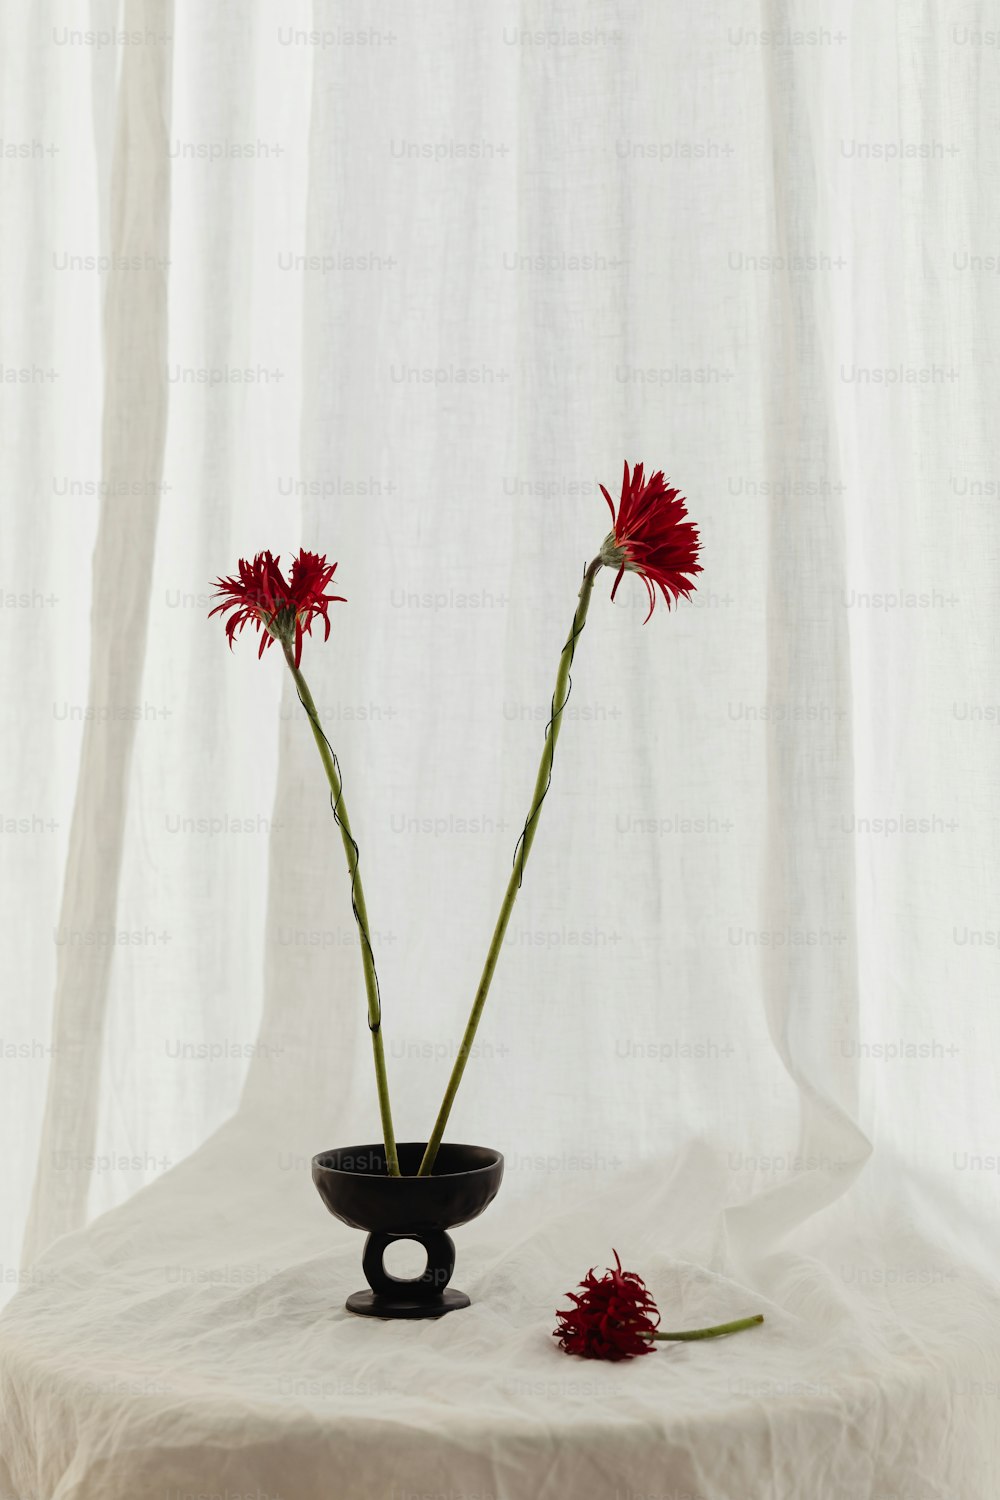 two red flowers in a black vase on a table